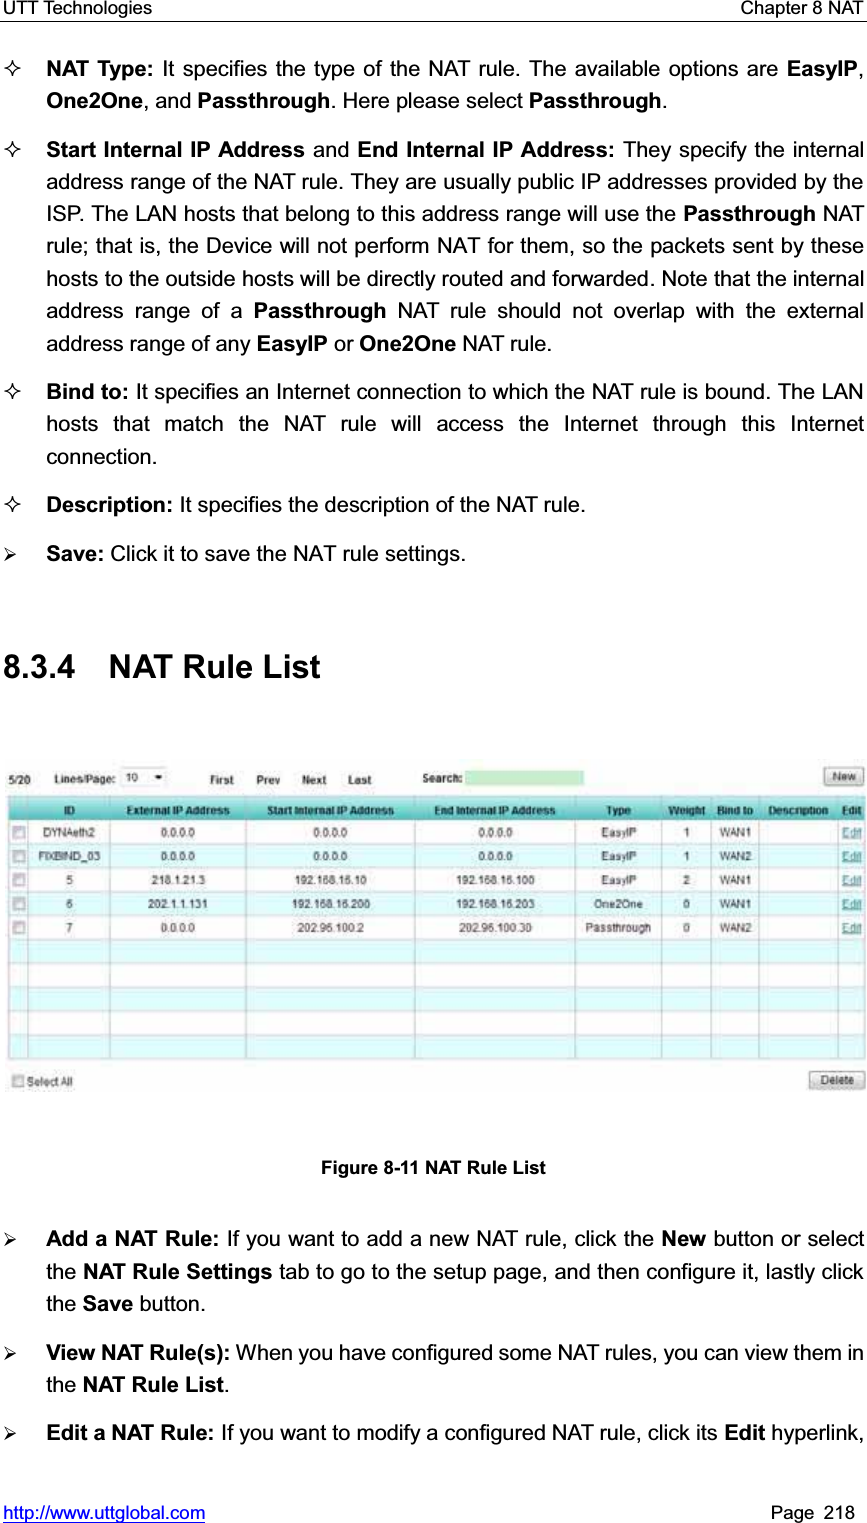 UTT Technologies    Chapter 8 NAT   http://www.uttglobal.com Page 218 NAT Type: It specifies the type of the NAT rule. The available options are EasyIP,One2One, and Passthrough. Here please select Passthrough.Start Internal IP Address and End Internal IP Address: They specify the internal address range of the NAT rule. They are usually public IP addresses provided by the ISP. The LAN hosts that belong to this address range will use the Passthrough NAT rule; that is, the Device will not perform NAT for them, so the packets sent by these hosts to the outside hosts will be directly routed and forwarded. Note that the internal address range of a Passthrough NAT rule should not overlap with the external address range of any EasyIP or One2One NAT rule. Bind to: It specifies an Internet connection to which the NAT rule is bound. The LAN hosts that match the NAT rule will access the Internet through this Internet connection. Description: It specifies the description of the NAT rule. ¾Save: Click it to save the NAT rule settings.8.3.4 NAT Rule List Figure 8-11 NAT Rule List ¾Add a NAT Rule: If you want to add a new NAT rule, click the New button or select the NAT Rule Settings tab to go to the setup page, and then configure it, lastly click the Save button. ¾View NAT Rule(s): When you have configured some NAT rules, you can view them in the NAT Rule List.¾Edit a NAT Rule: If you want to modify a configured NAT rule, click its Edit hyperlink, 